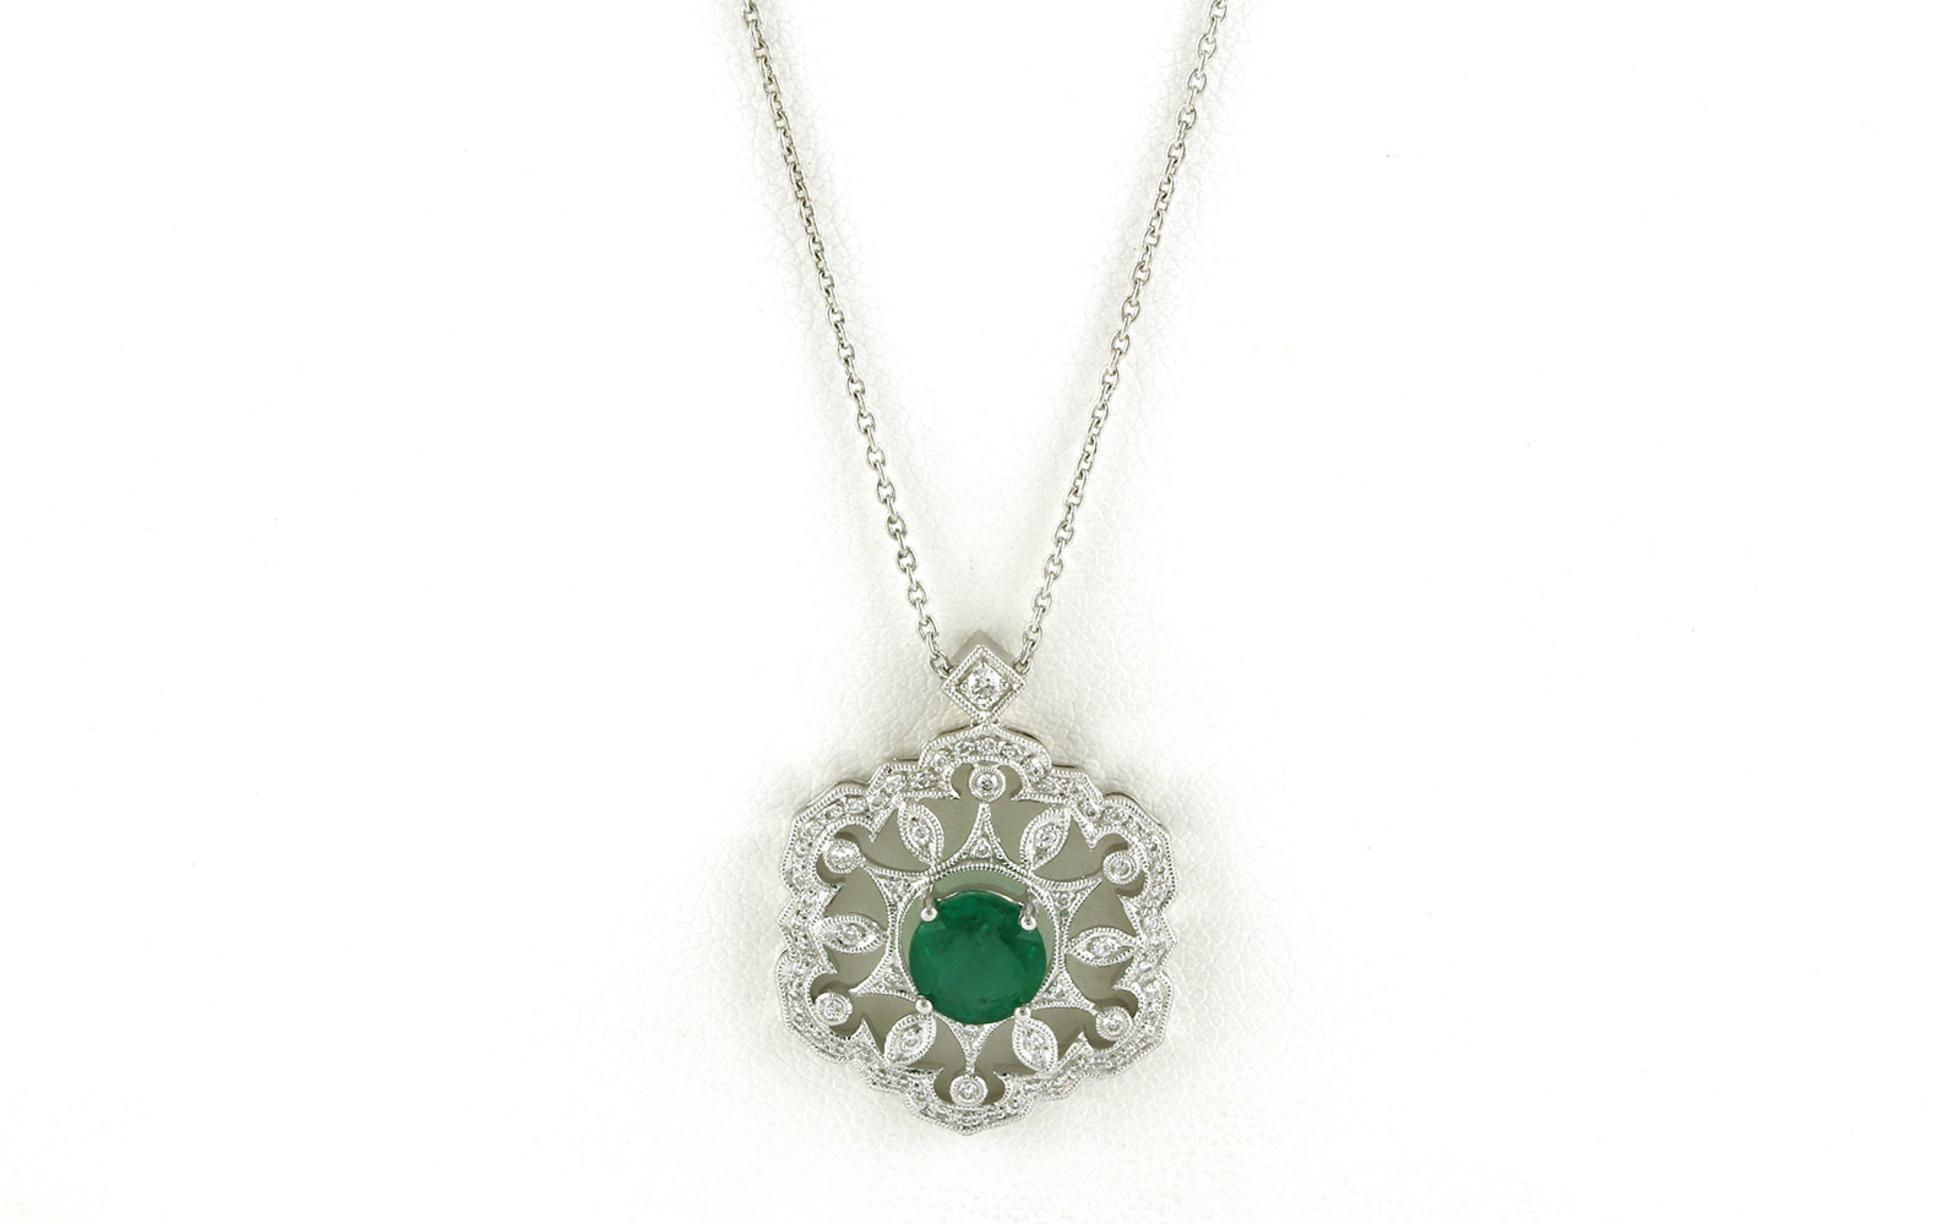 Antique-style Filligree Emerald and Diamond Necklace in White Gold